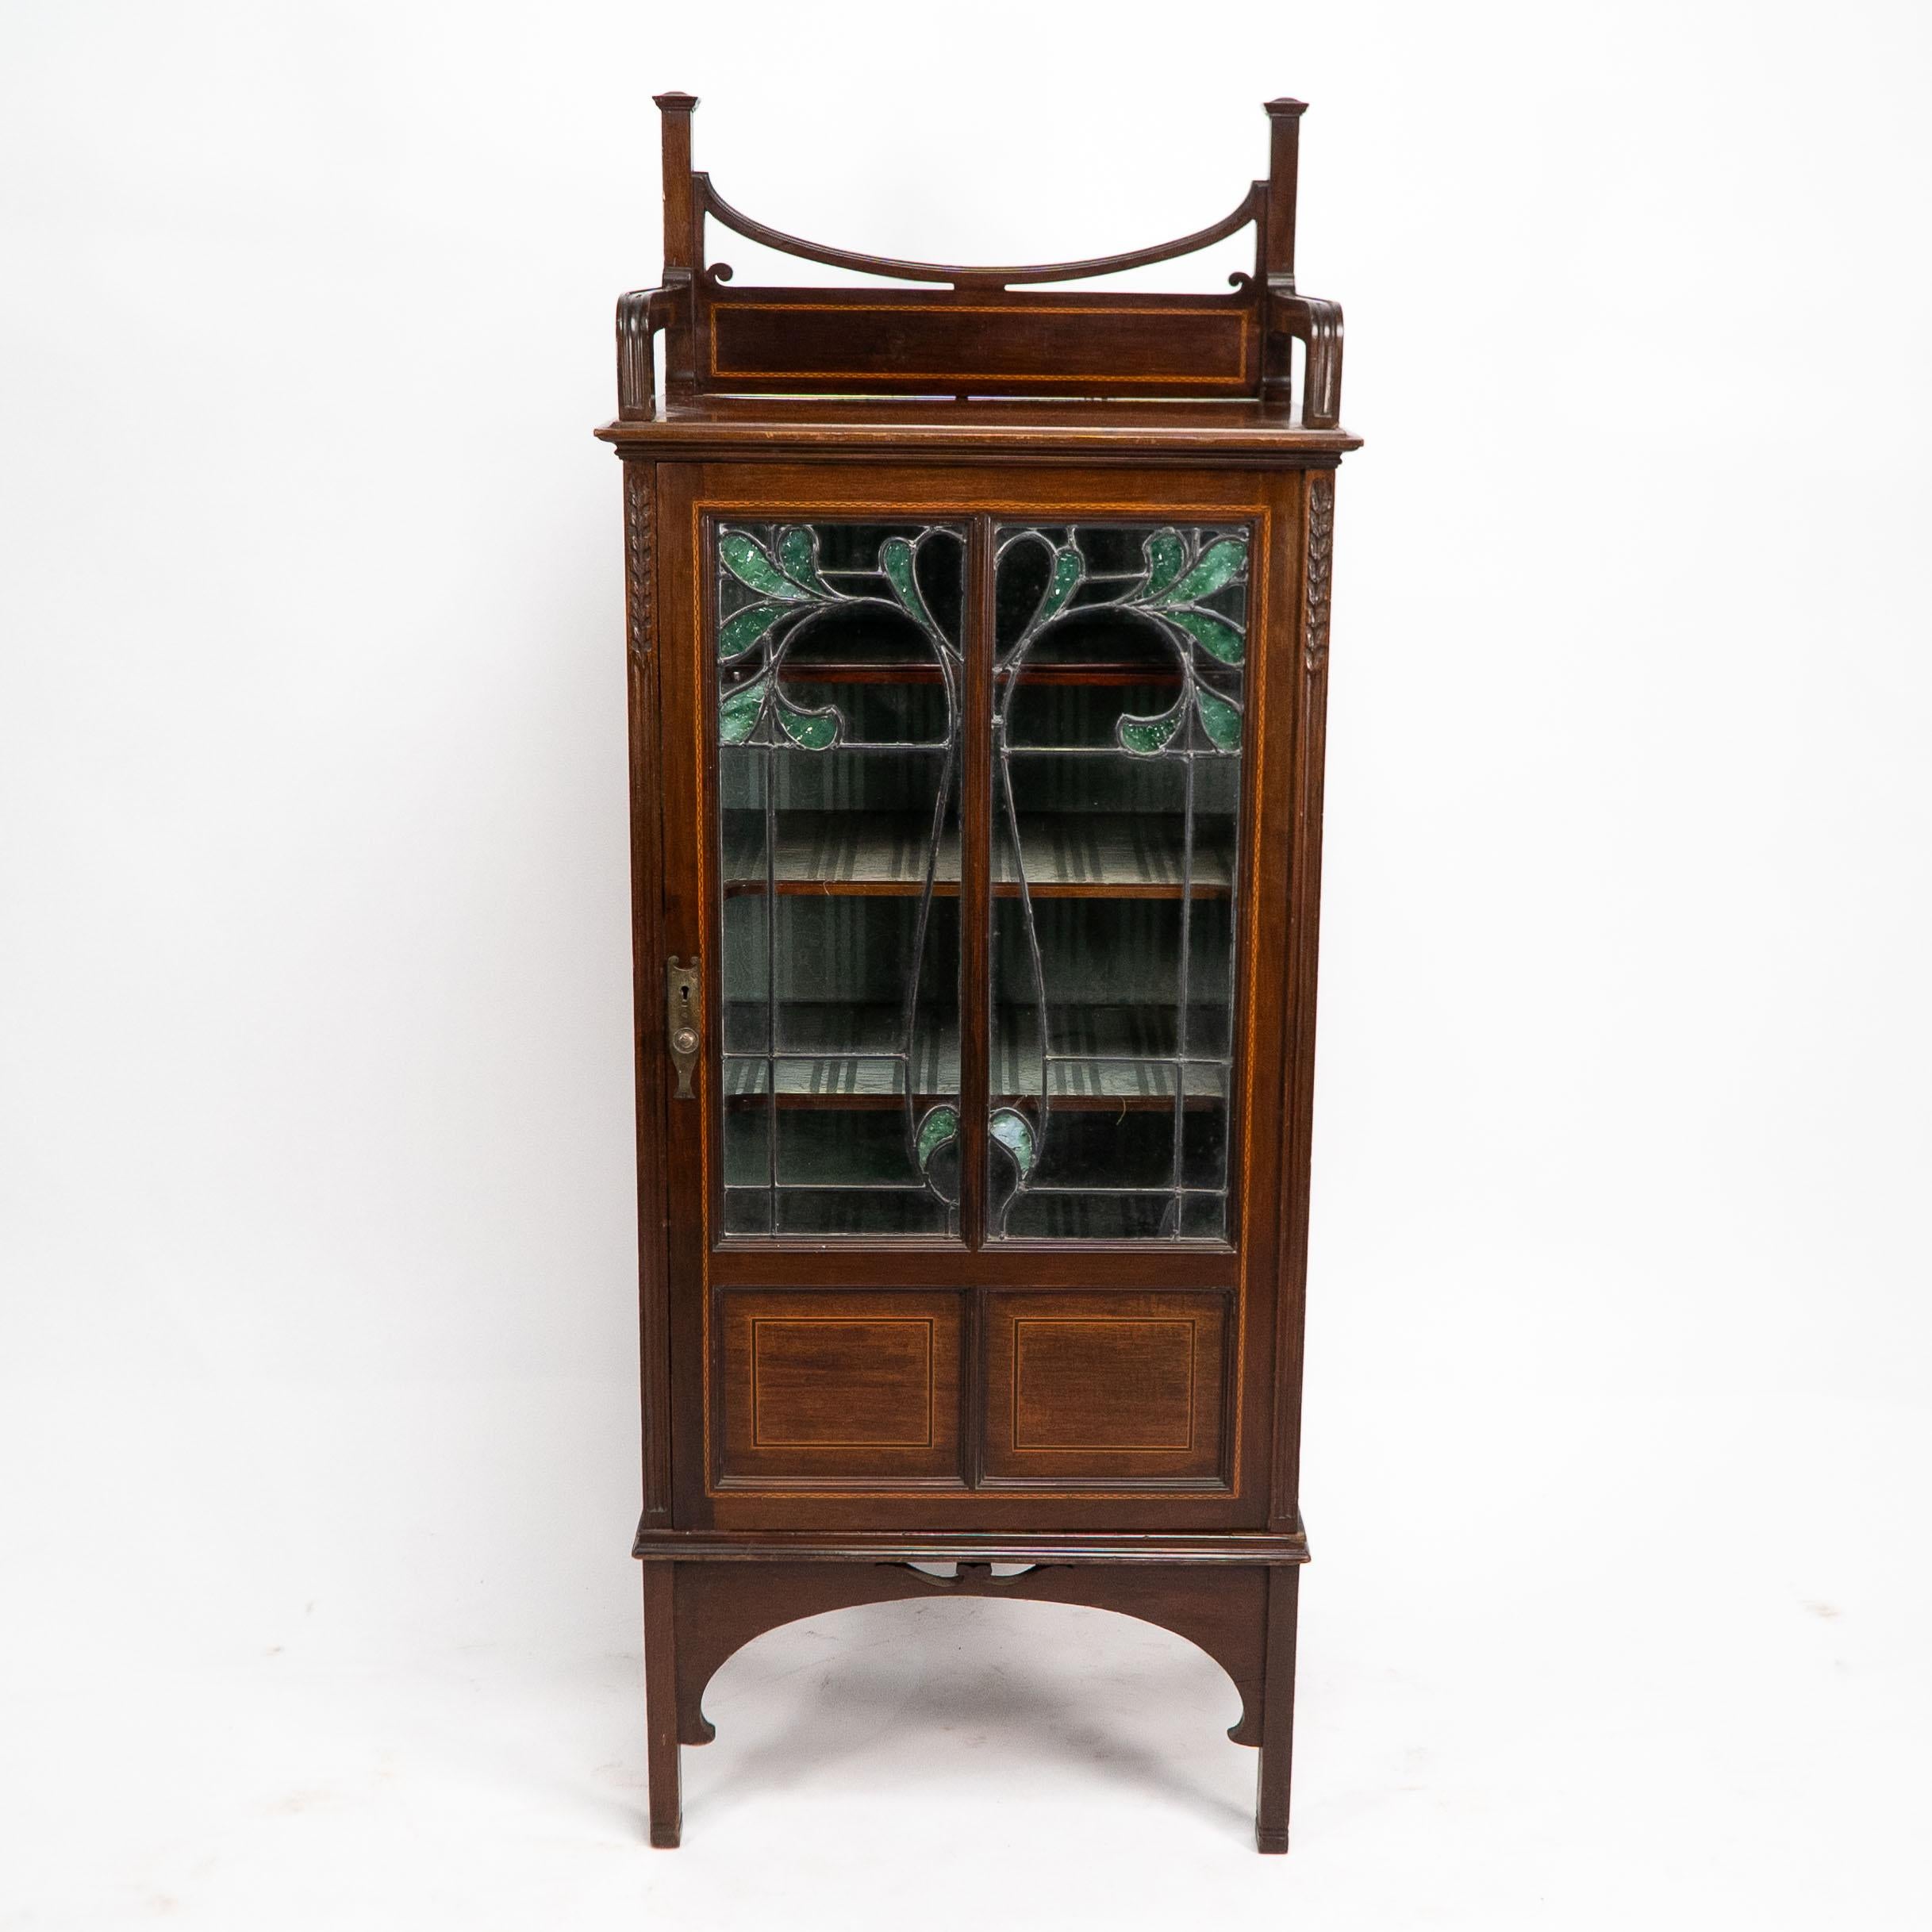 A petite Arts and Crafts mahogany display cabinet in the Anglo-Japanese style with chequer string inlays and carved fern details to the upper sides with stained and coloured leaded floral glass work to the door.
 
 